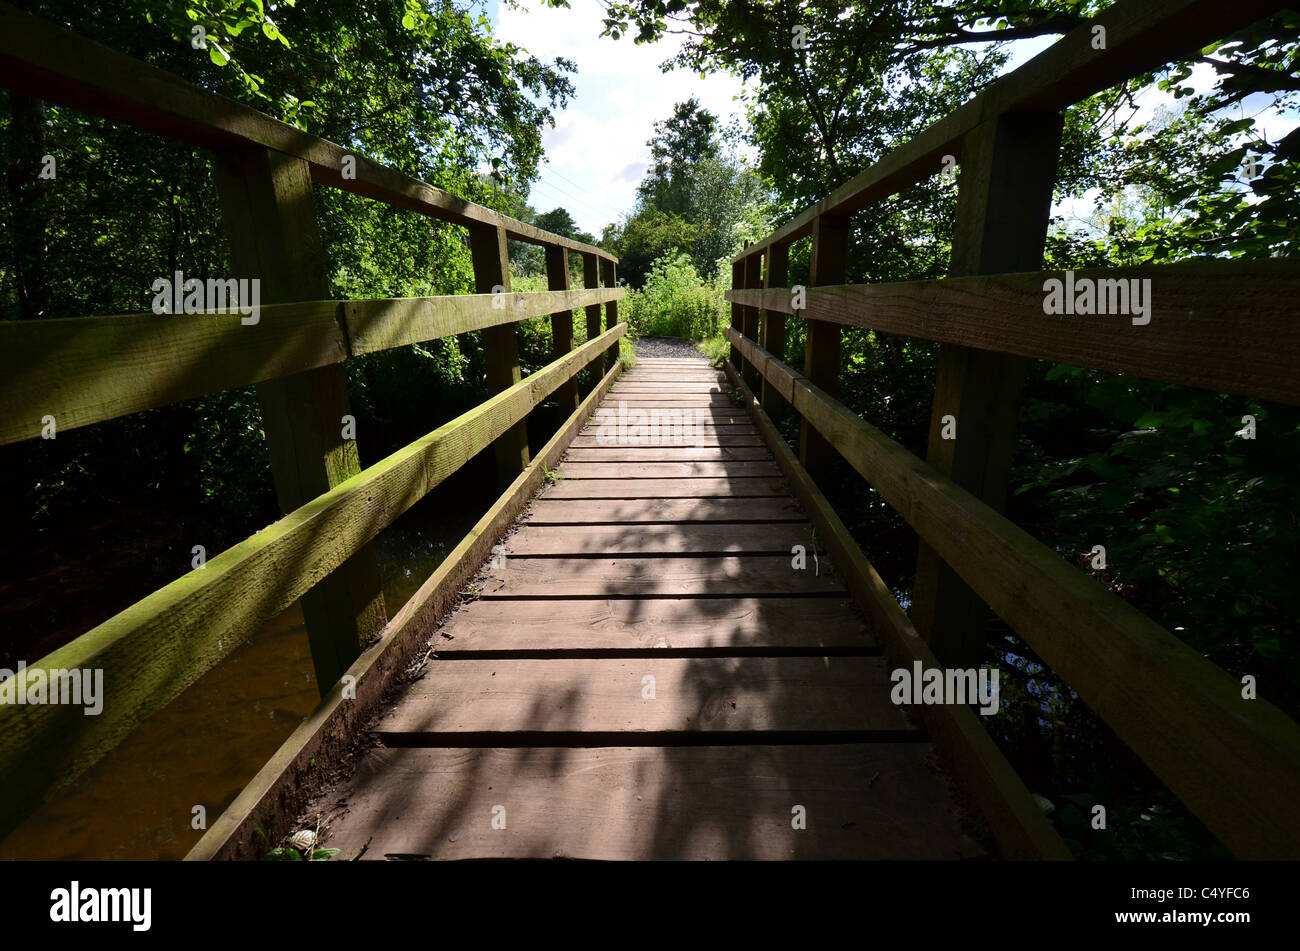 arrow valley country park redditch worcestershire Stock Photo